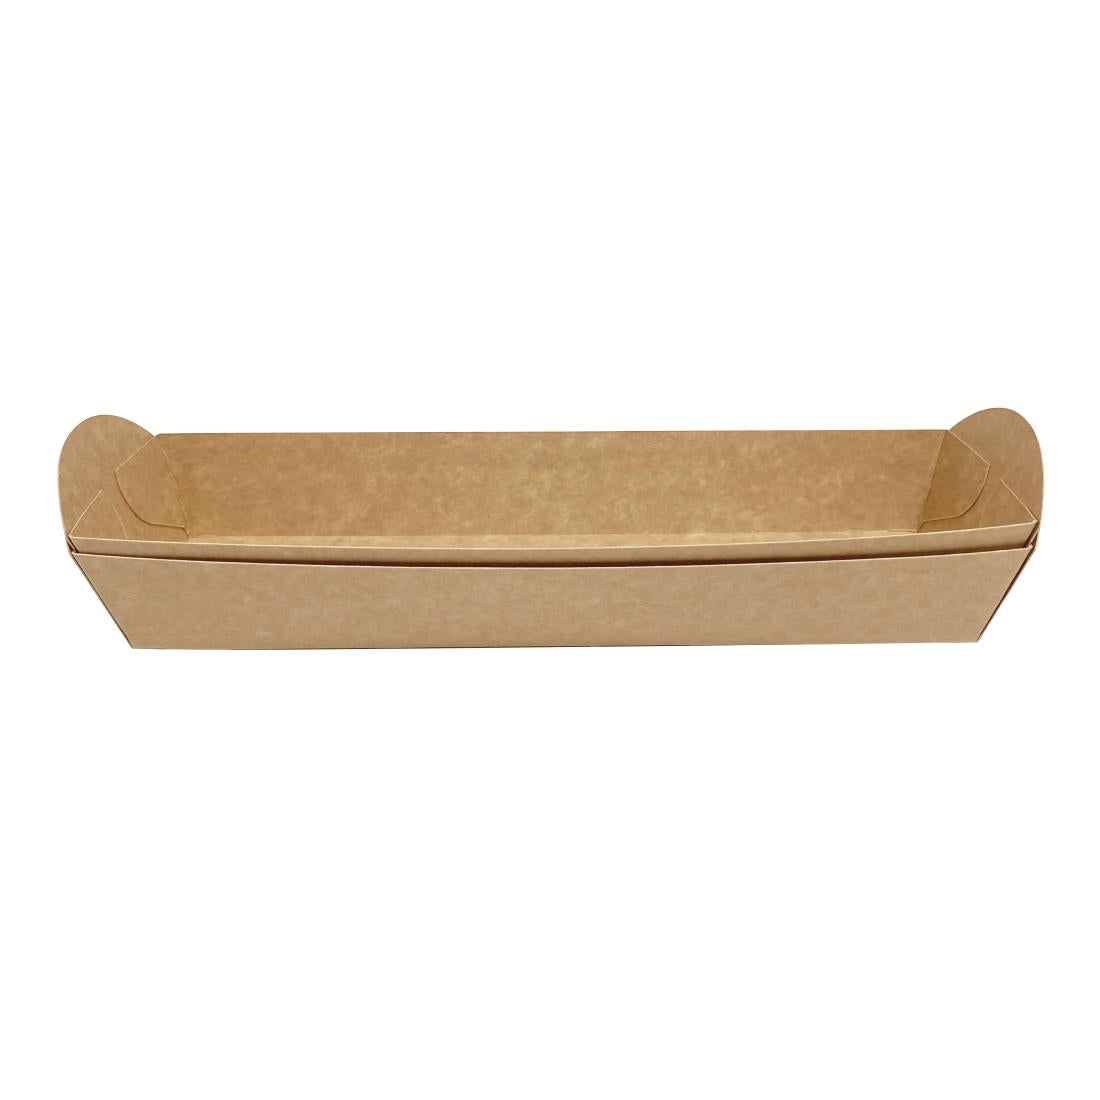 FT657 Fiesta Recyclable Baguette Tray (Pack of 500) JD Catering Equipment Solutions Ltd